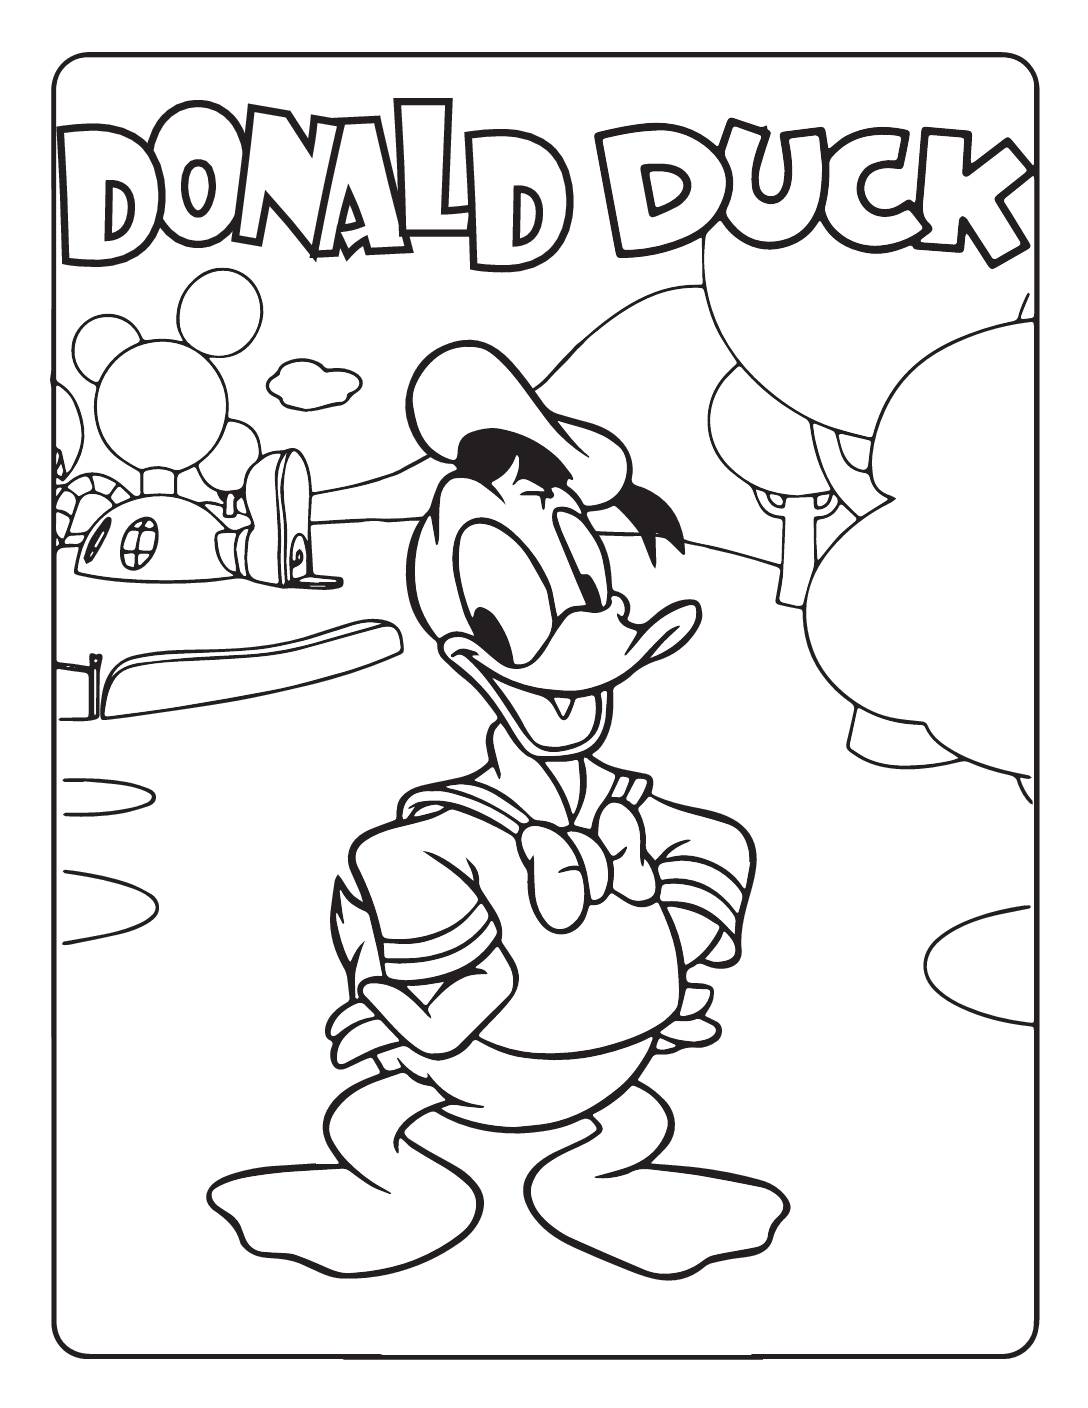 Donald Duck Coloring Page Coloring Pages